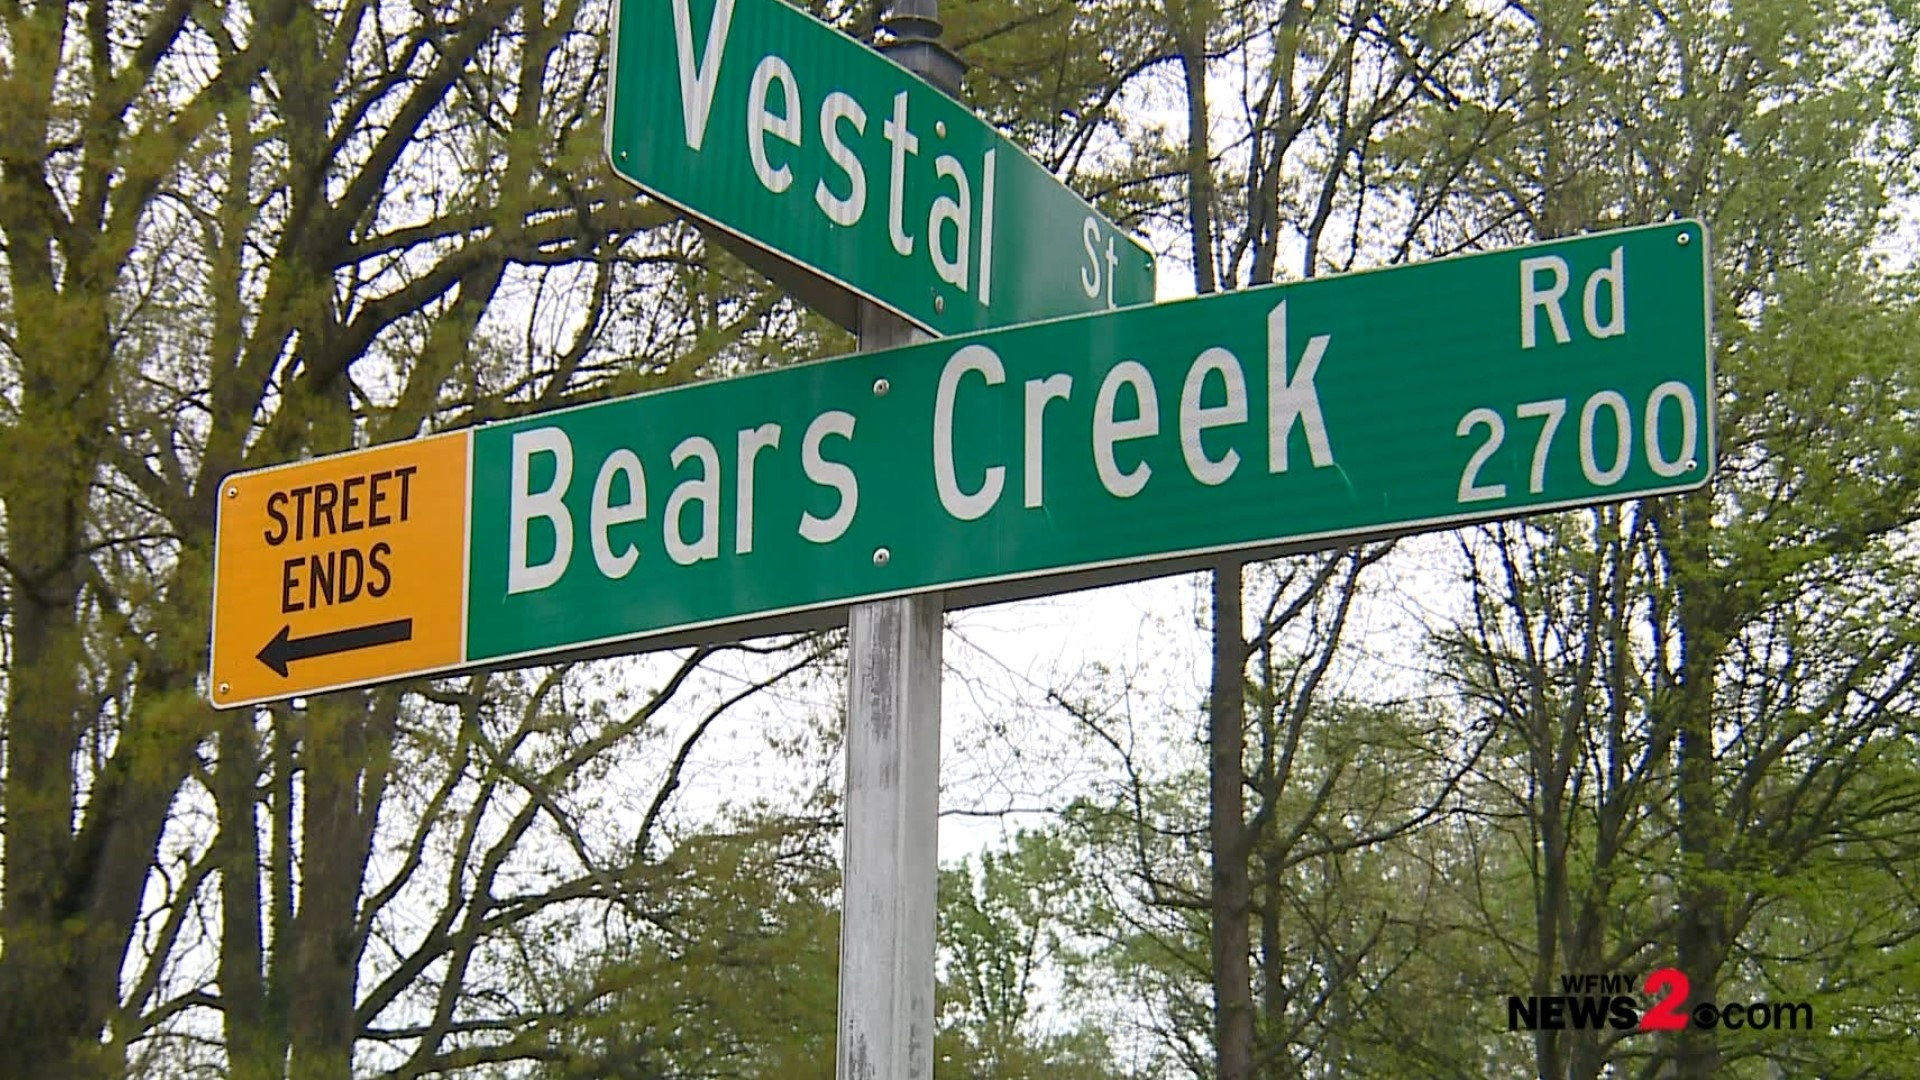 Greensboro police said a person was injured in a shooting on Bears Creek Road.